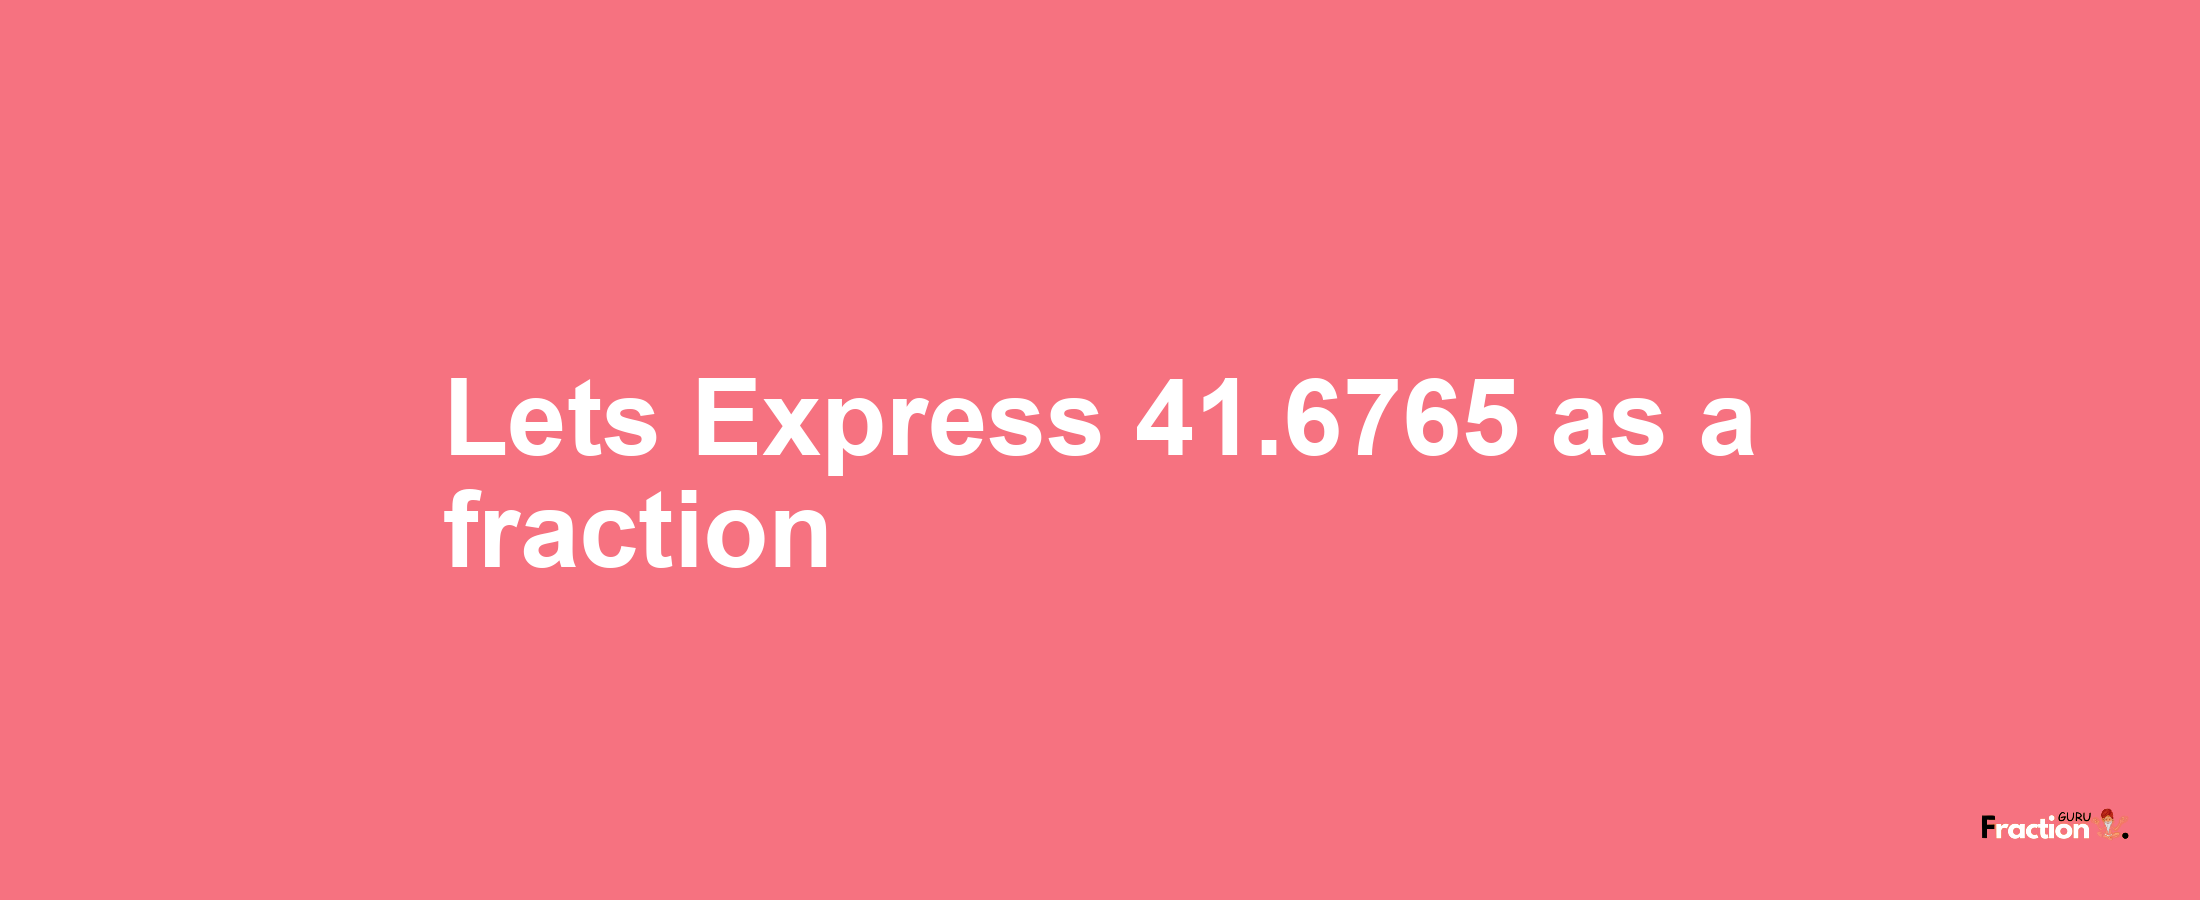 Lets Express 41.6765 as afraction